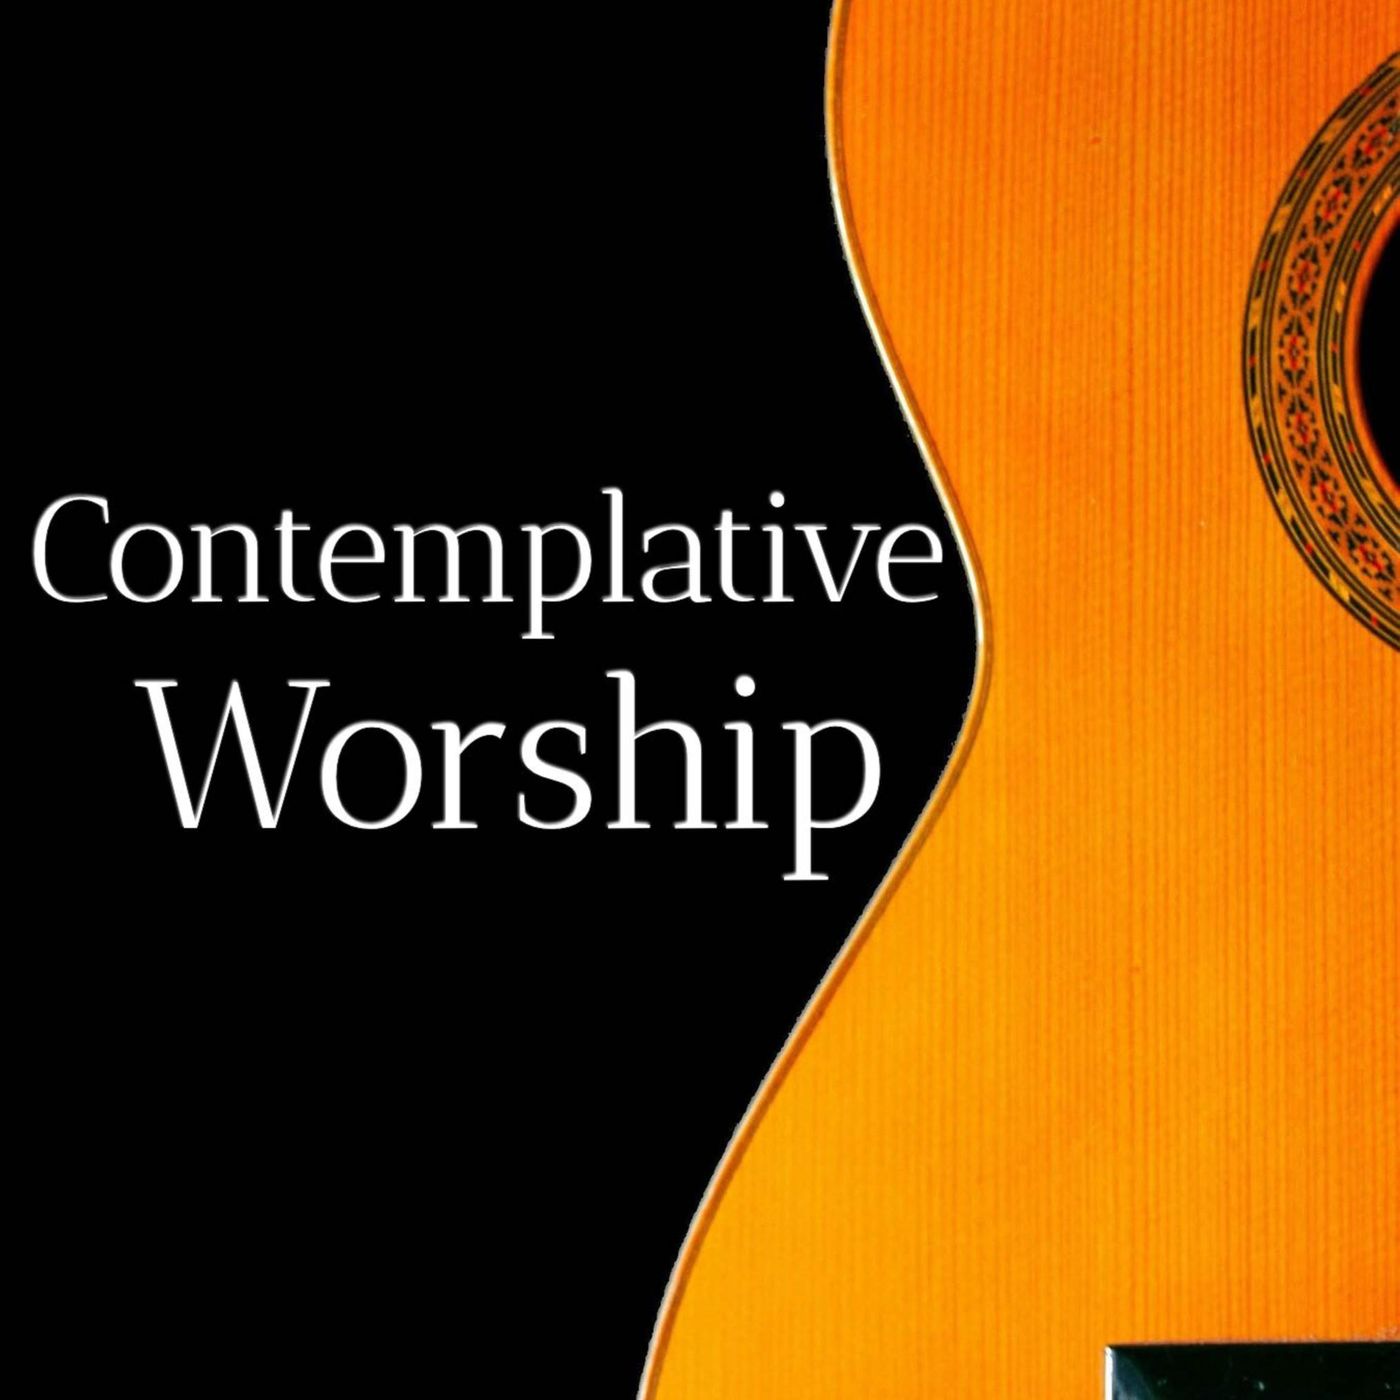 Announcement-Join us for Contemplative Worship Live on Thursday 17th February 2022